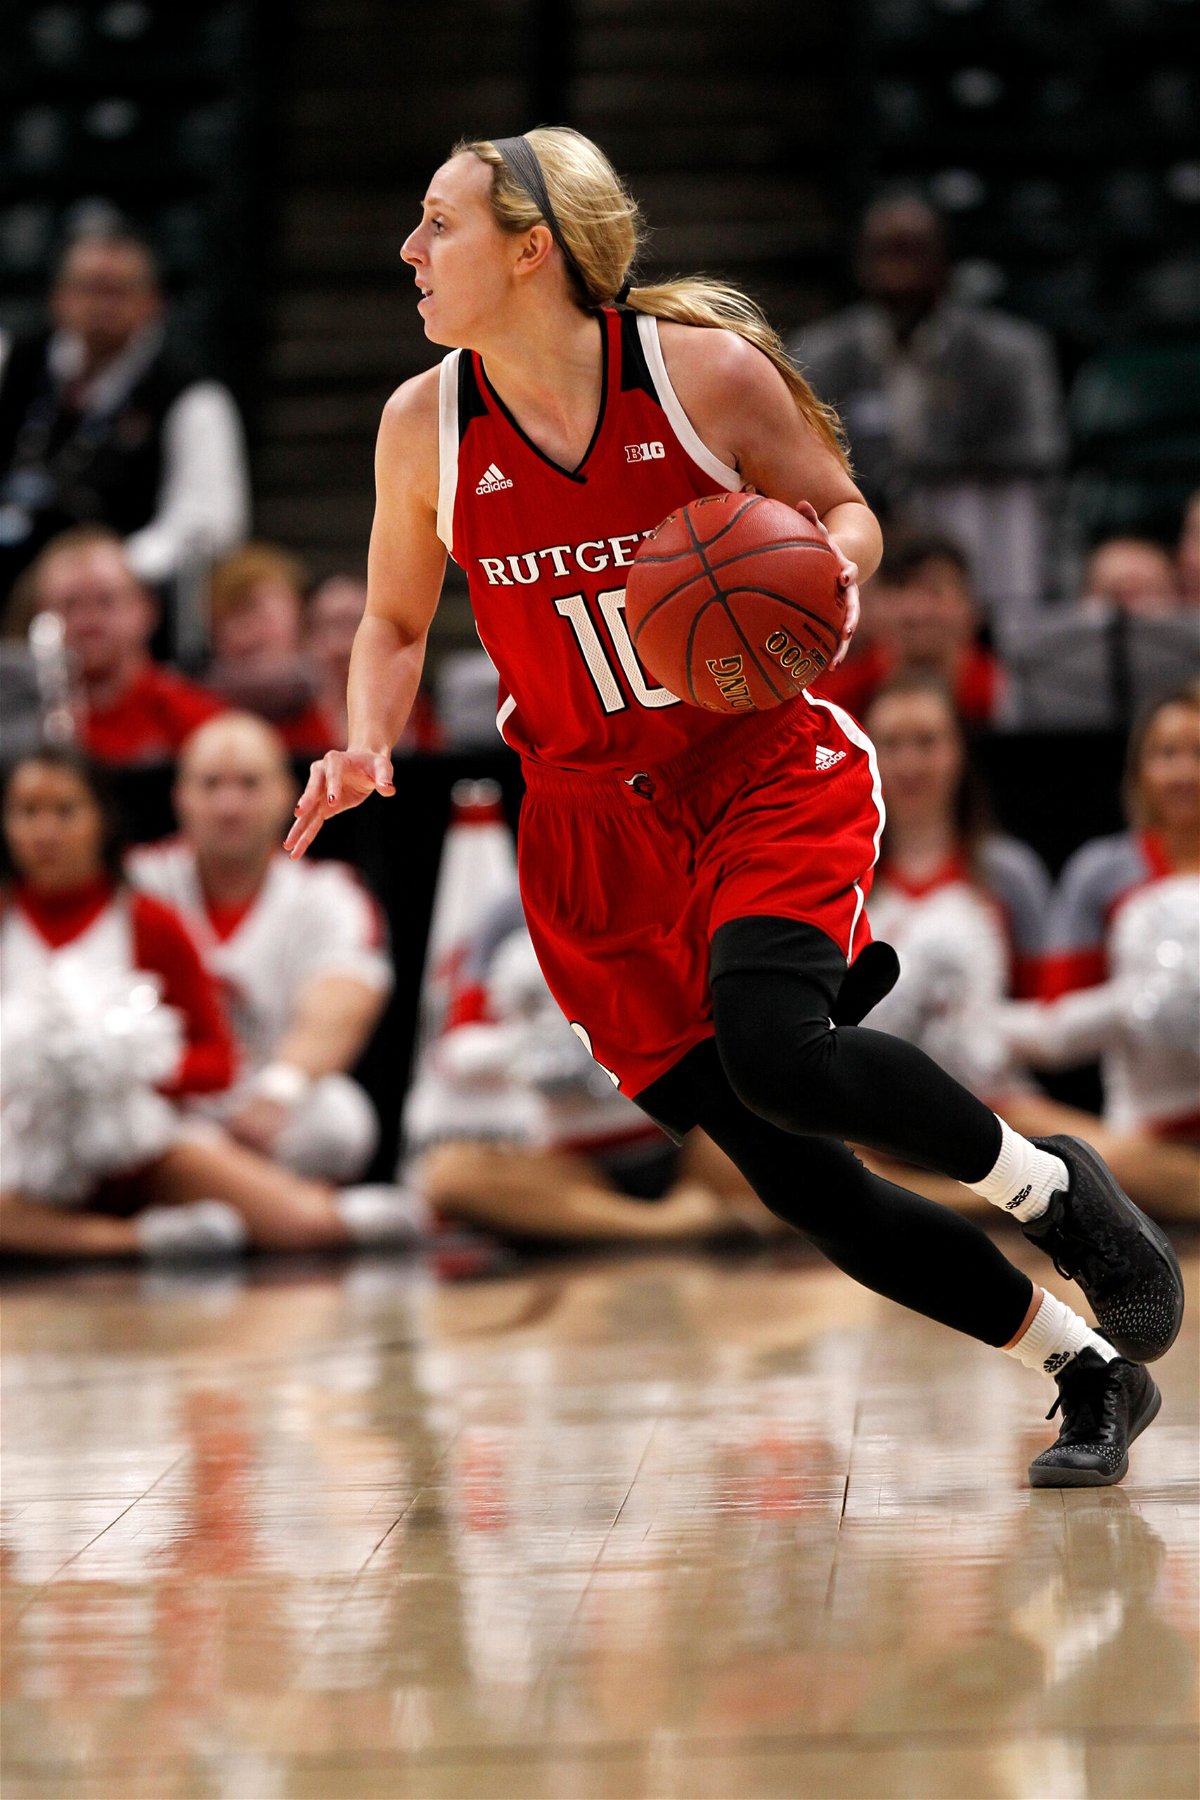 <i>Jeffrey Brown/Icon Sportswire/Getty Images</i><br/>Kathleen Fitzpatrick was a guard for the Rutgers Scarlet Knights. Here she is seen in a game against the Ohio State Buckeyes in Indianapolis in March 2018. Now a teacher